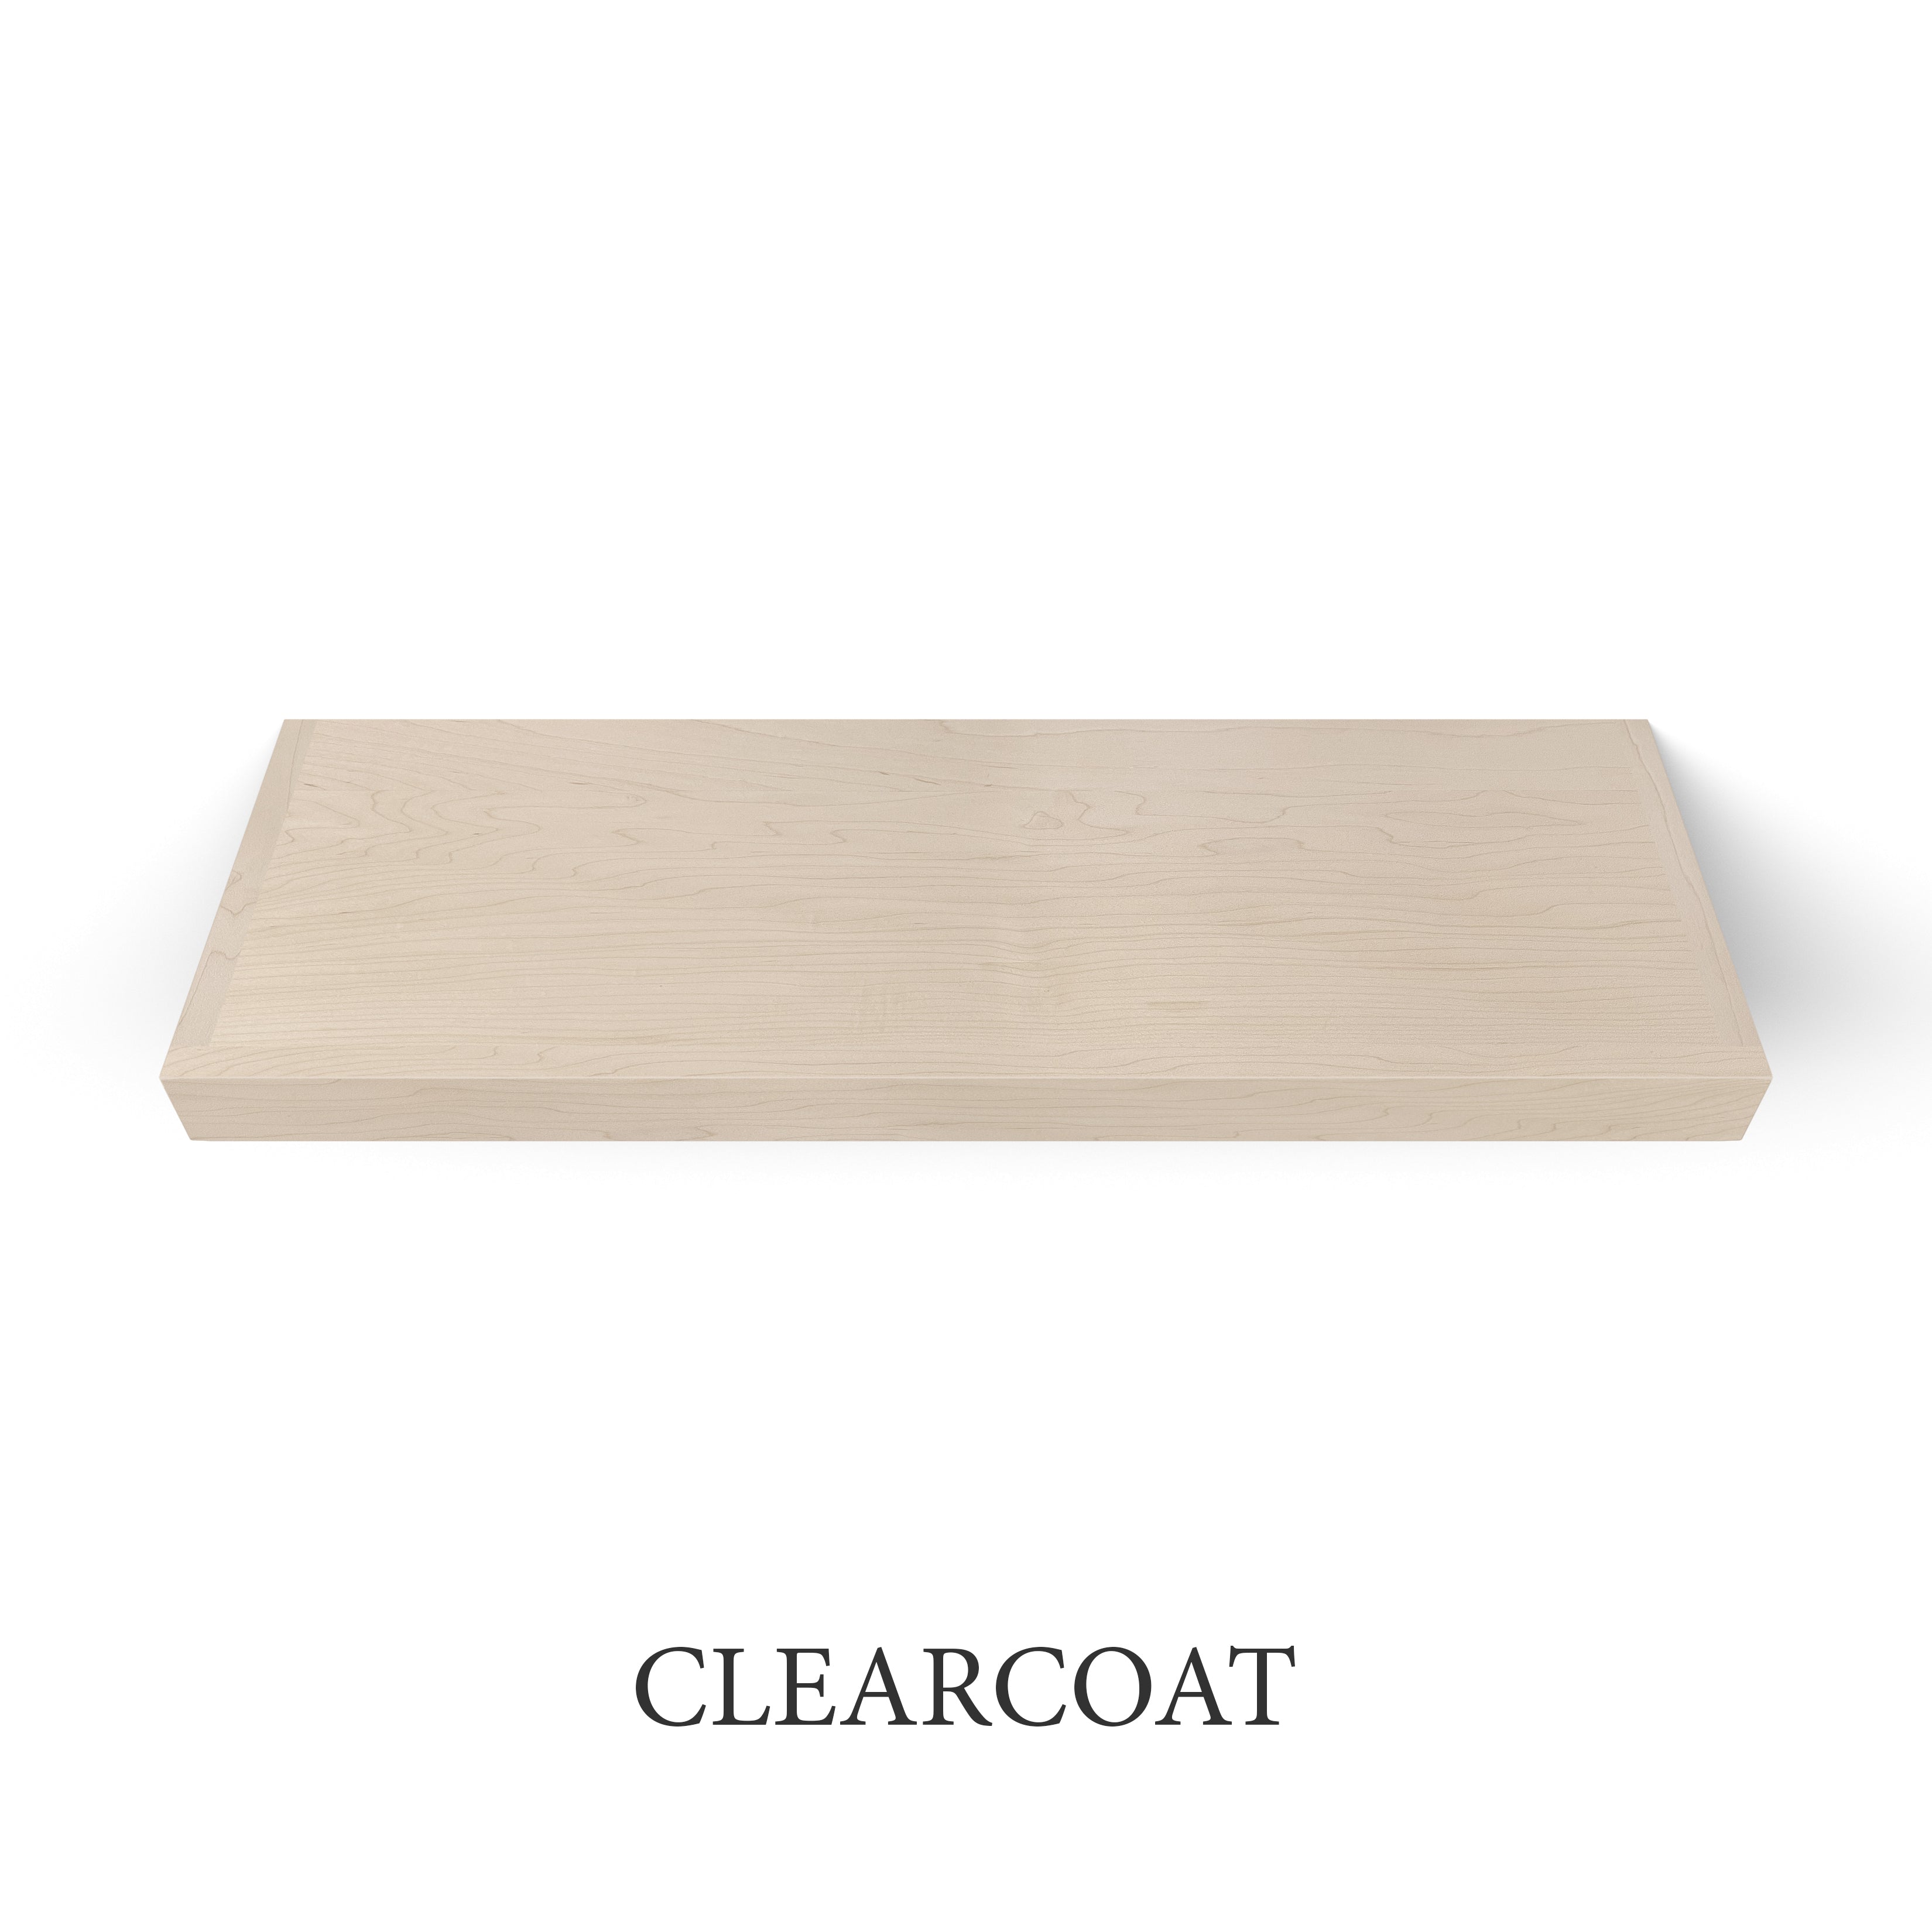 clearcoat Maple 2 inch Thick Floating Shelf